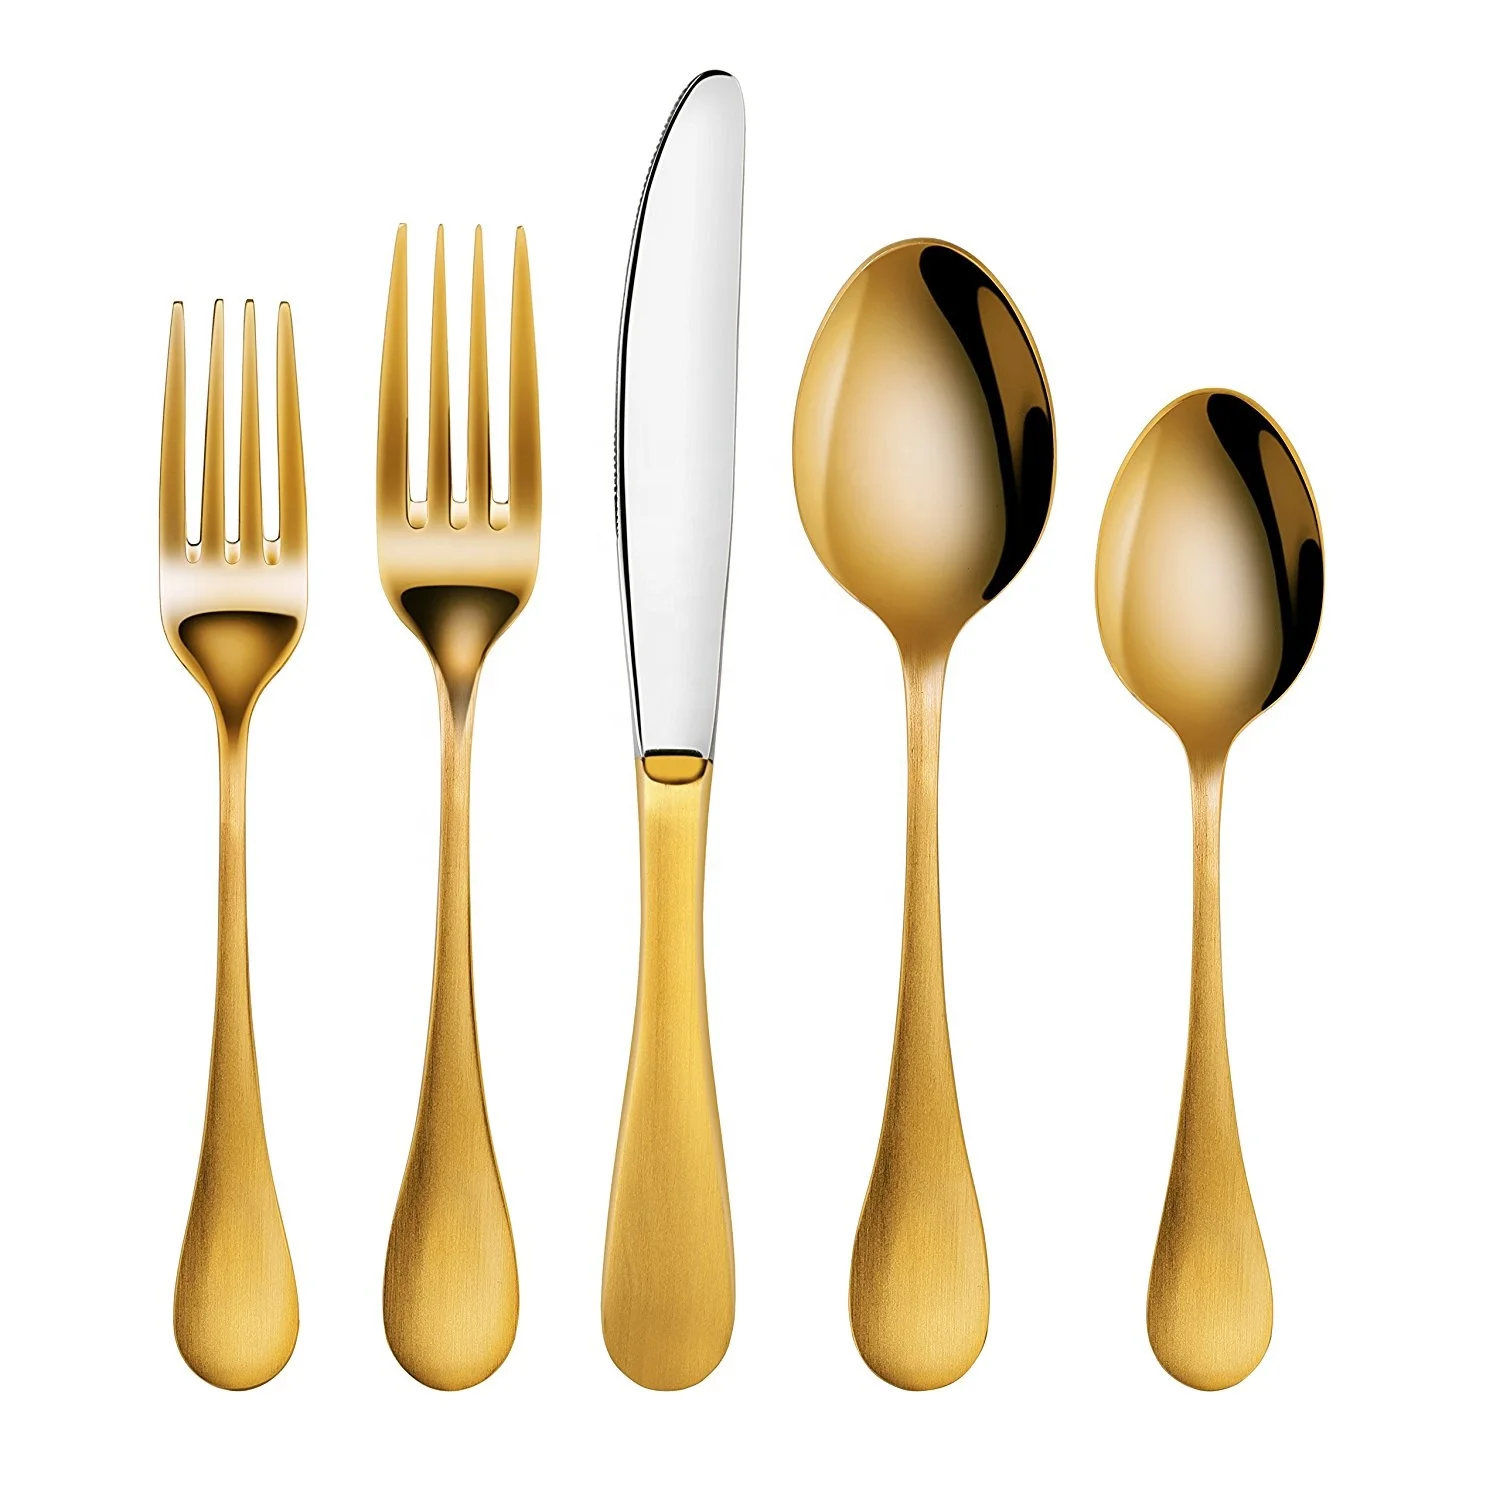 
Colored cutlery 24pc flatware set stainless steel gold plated for restaurant wholesale 